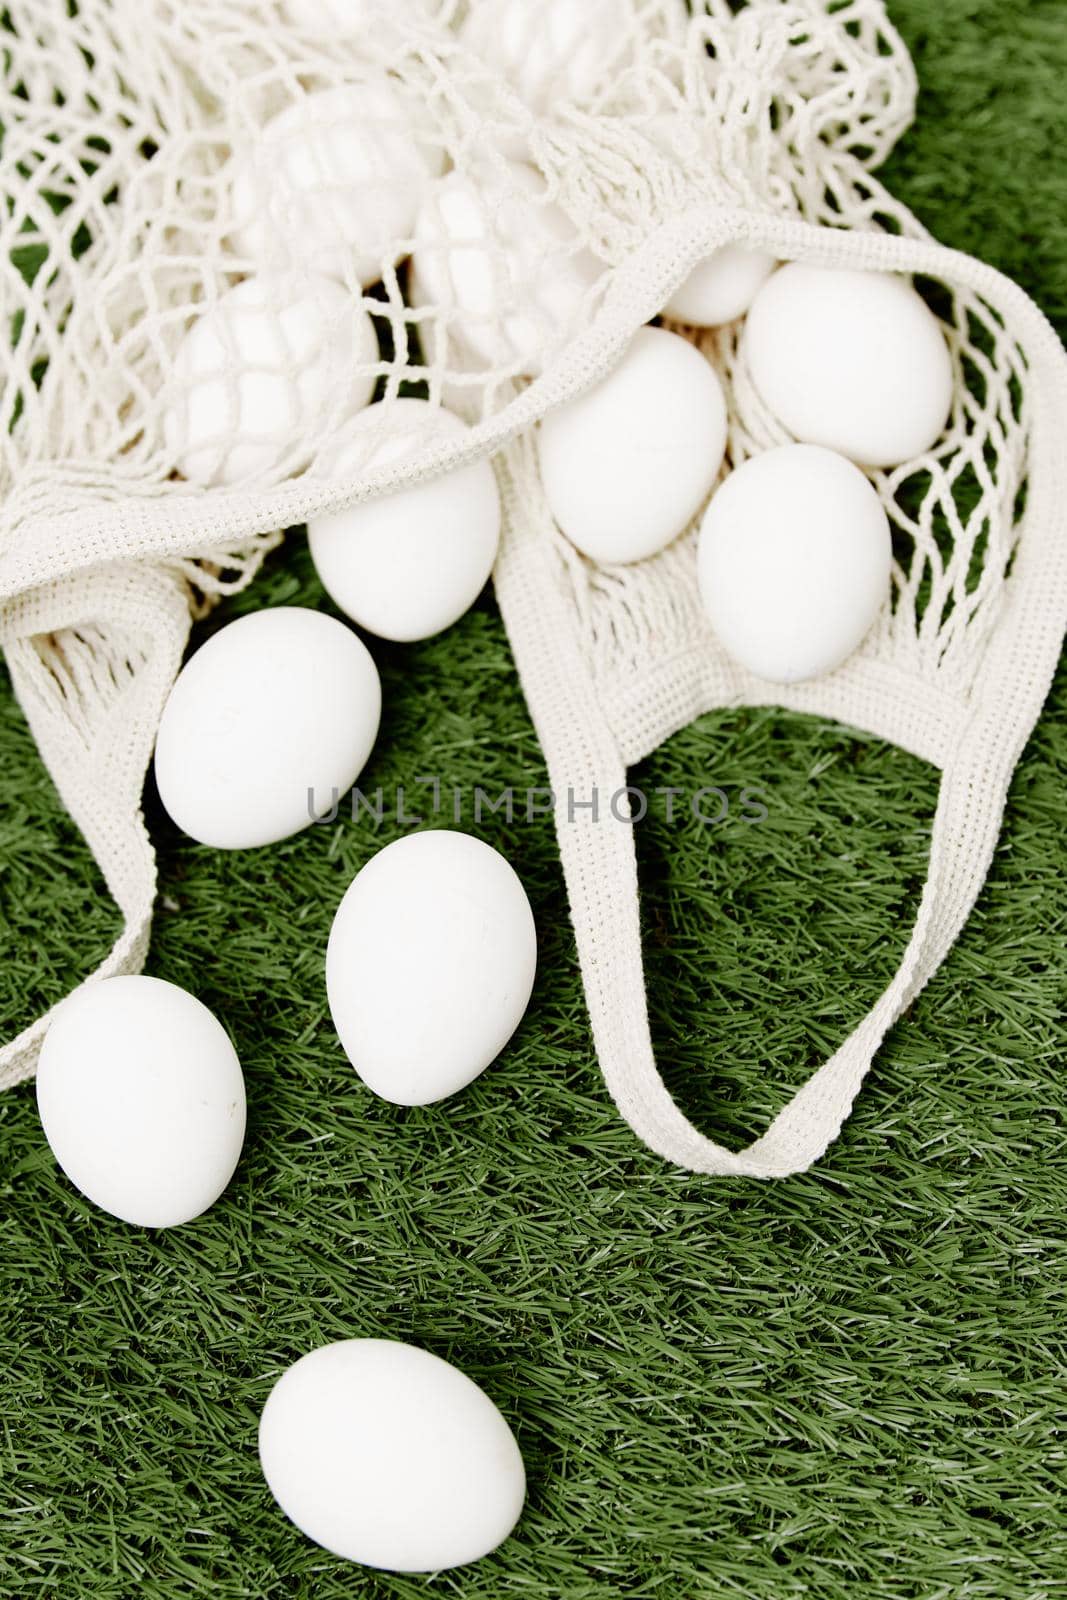 white eggs on the lawn easter christian day spring by SHOTPRIME